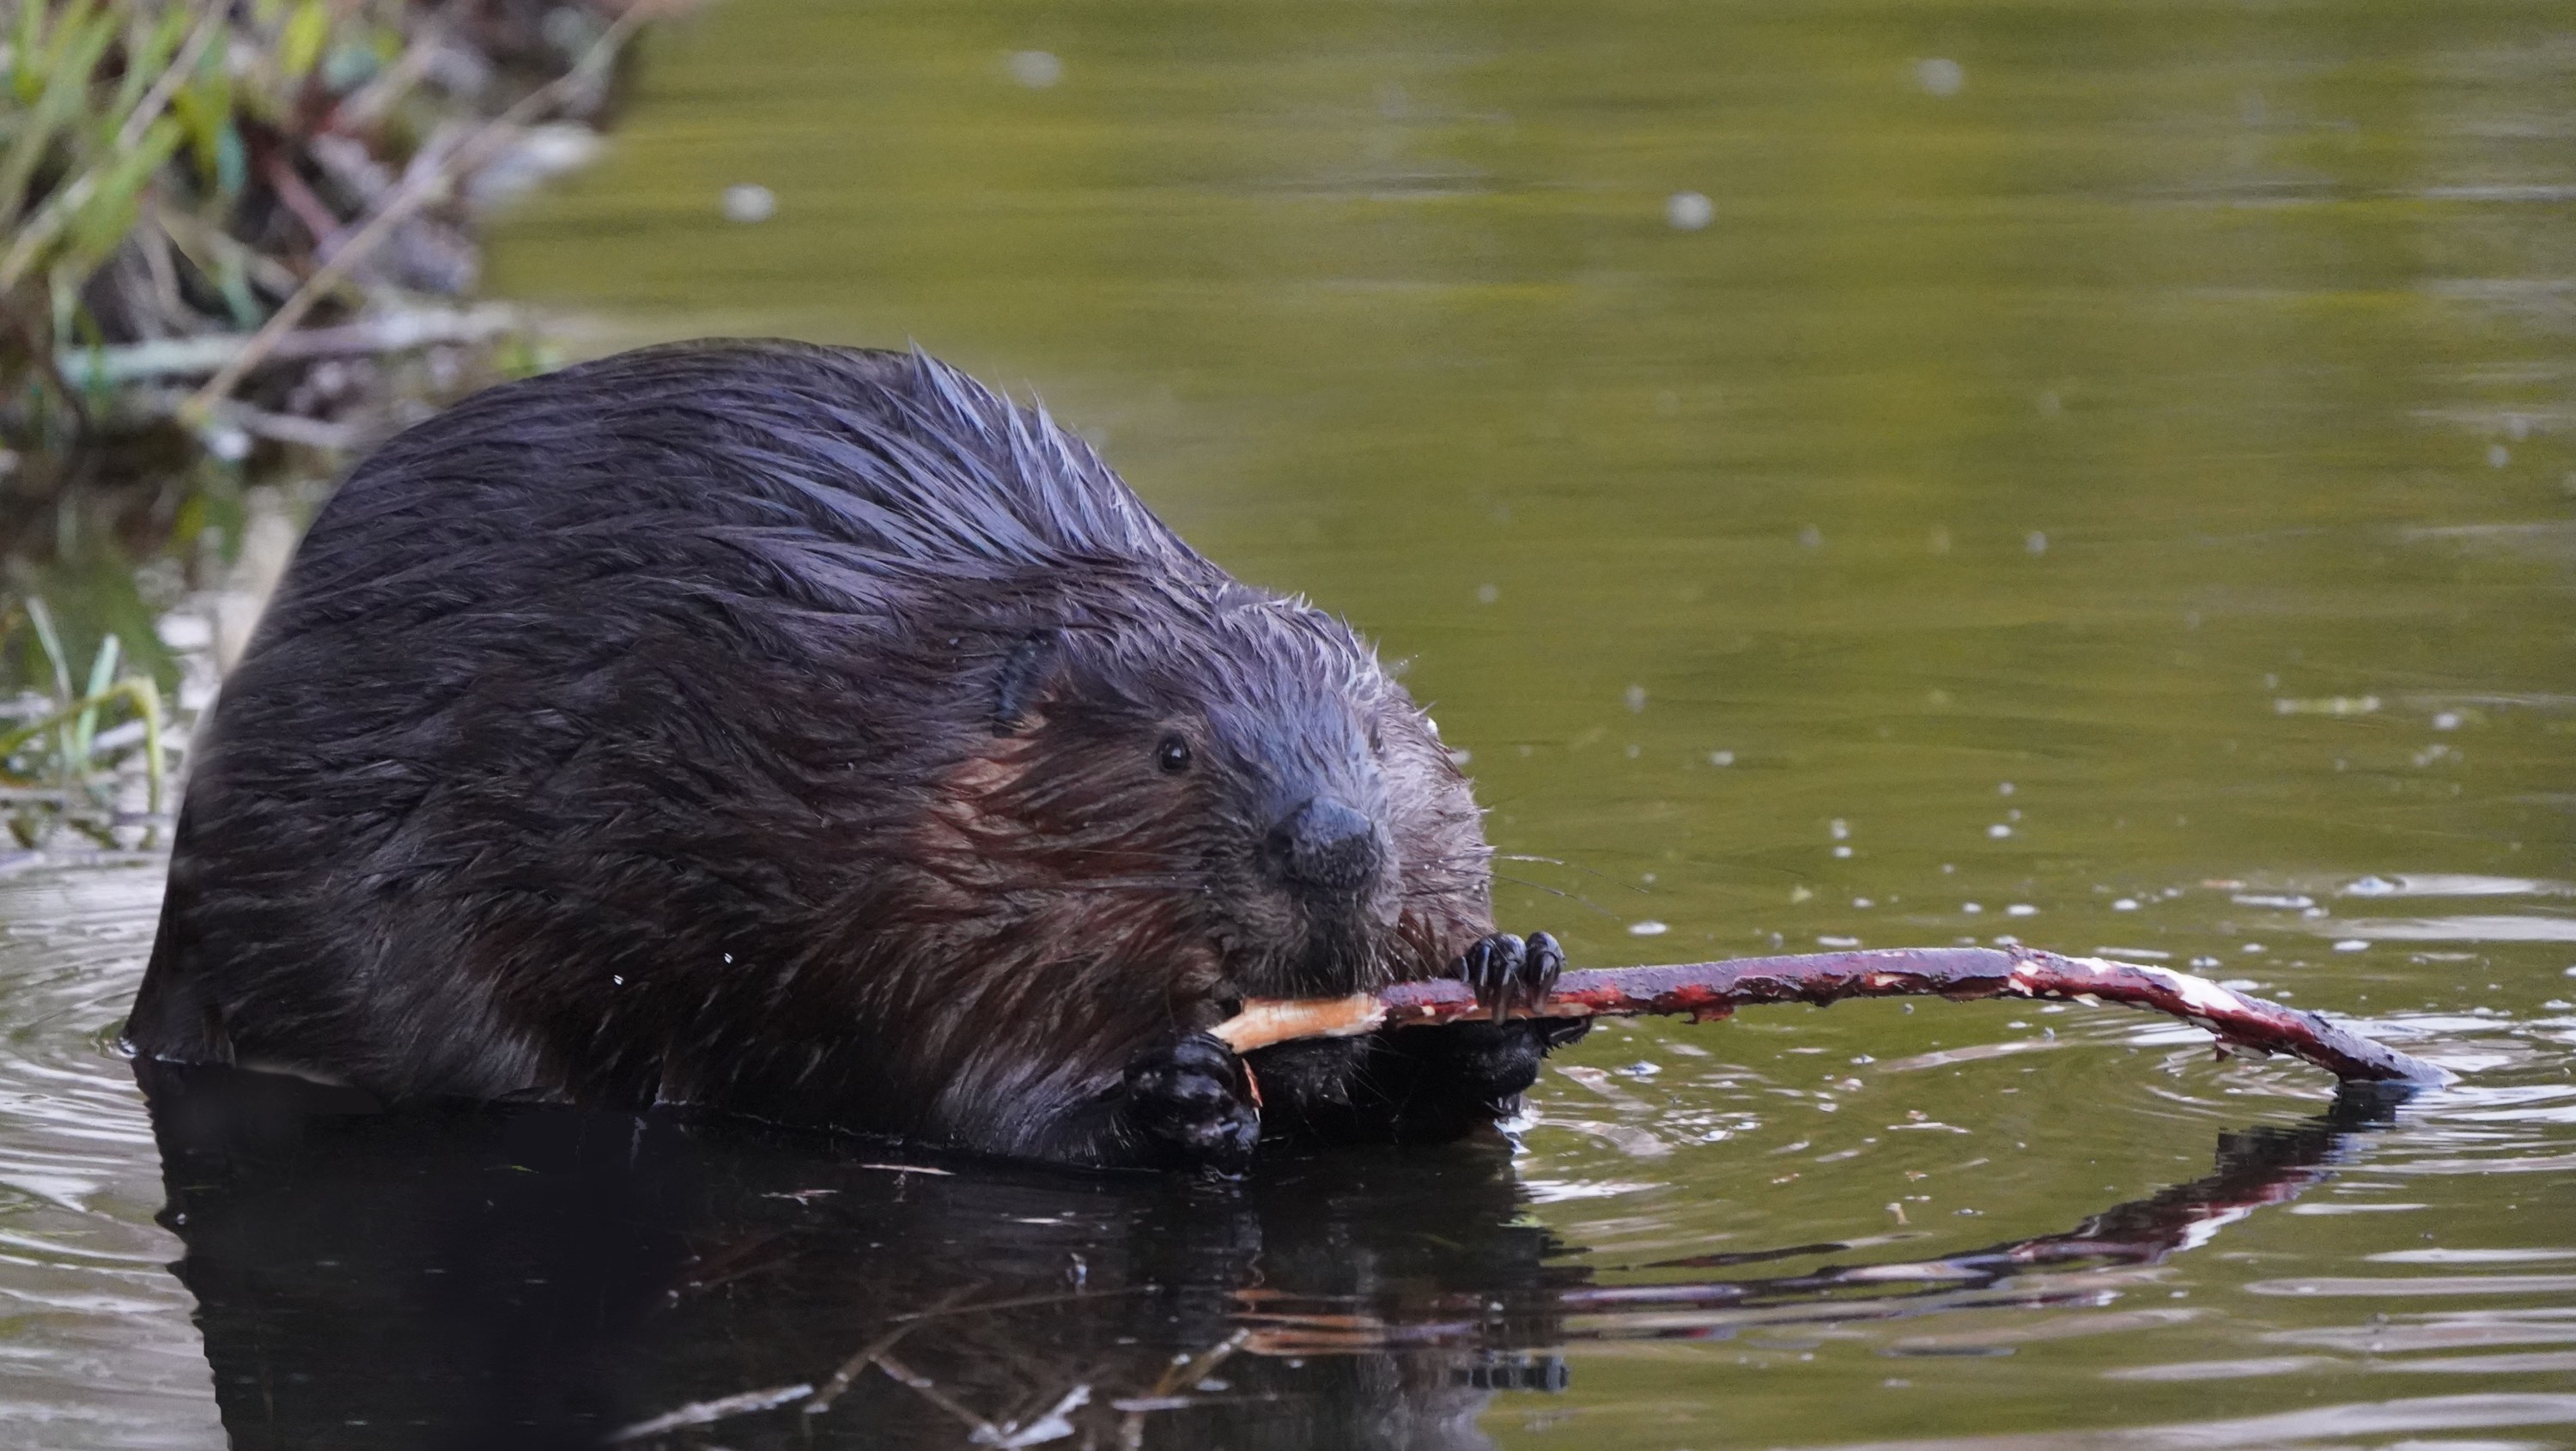 Beavers are susceptible to chronic wasting disease, according to a new study by researchers looking into how the fatal disease may be spreading among wildlife. 